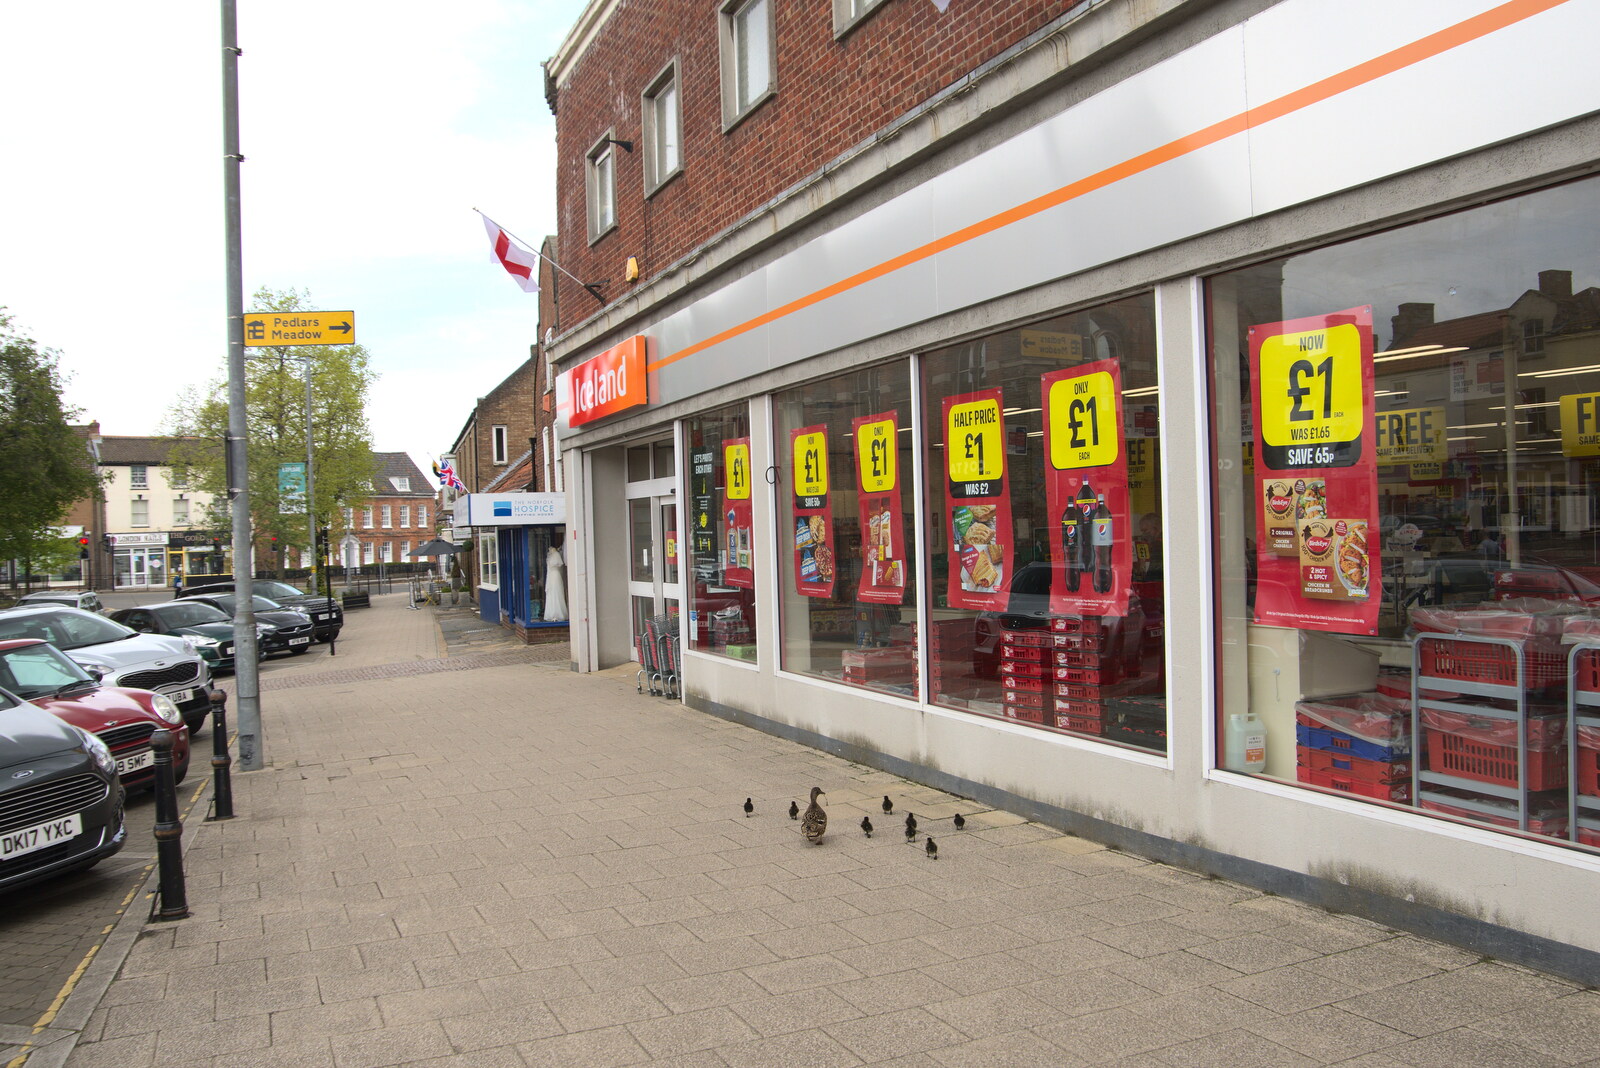 The ducks trundle past Iceland from A Vaccination Afternoon, Swaffham, Norfolk - 9th May 2021